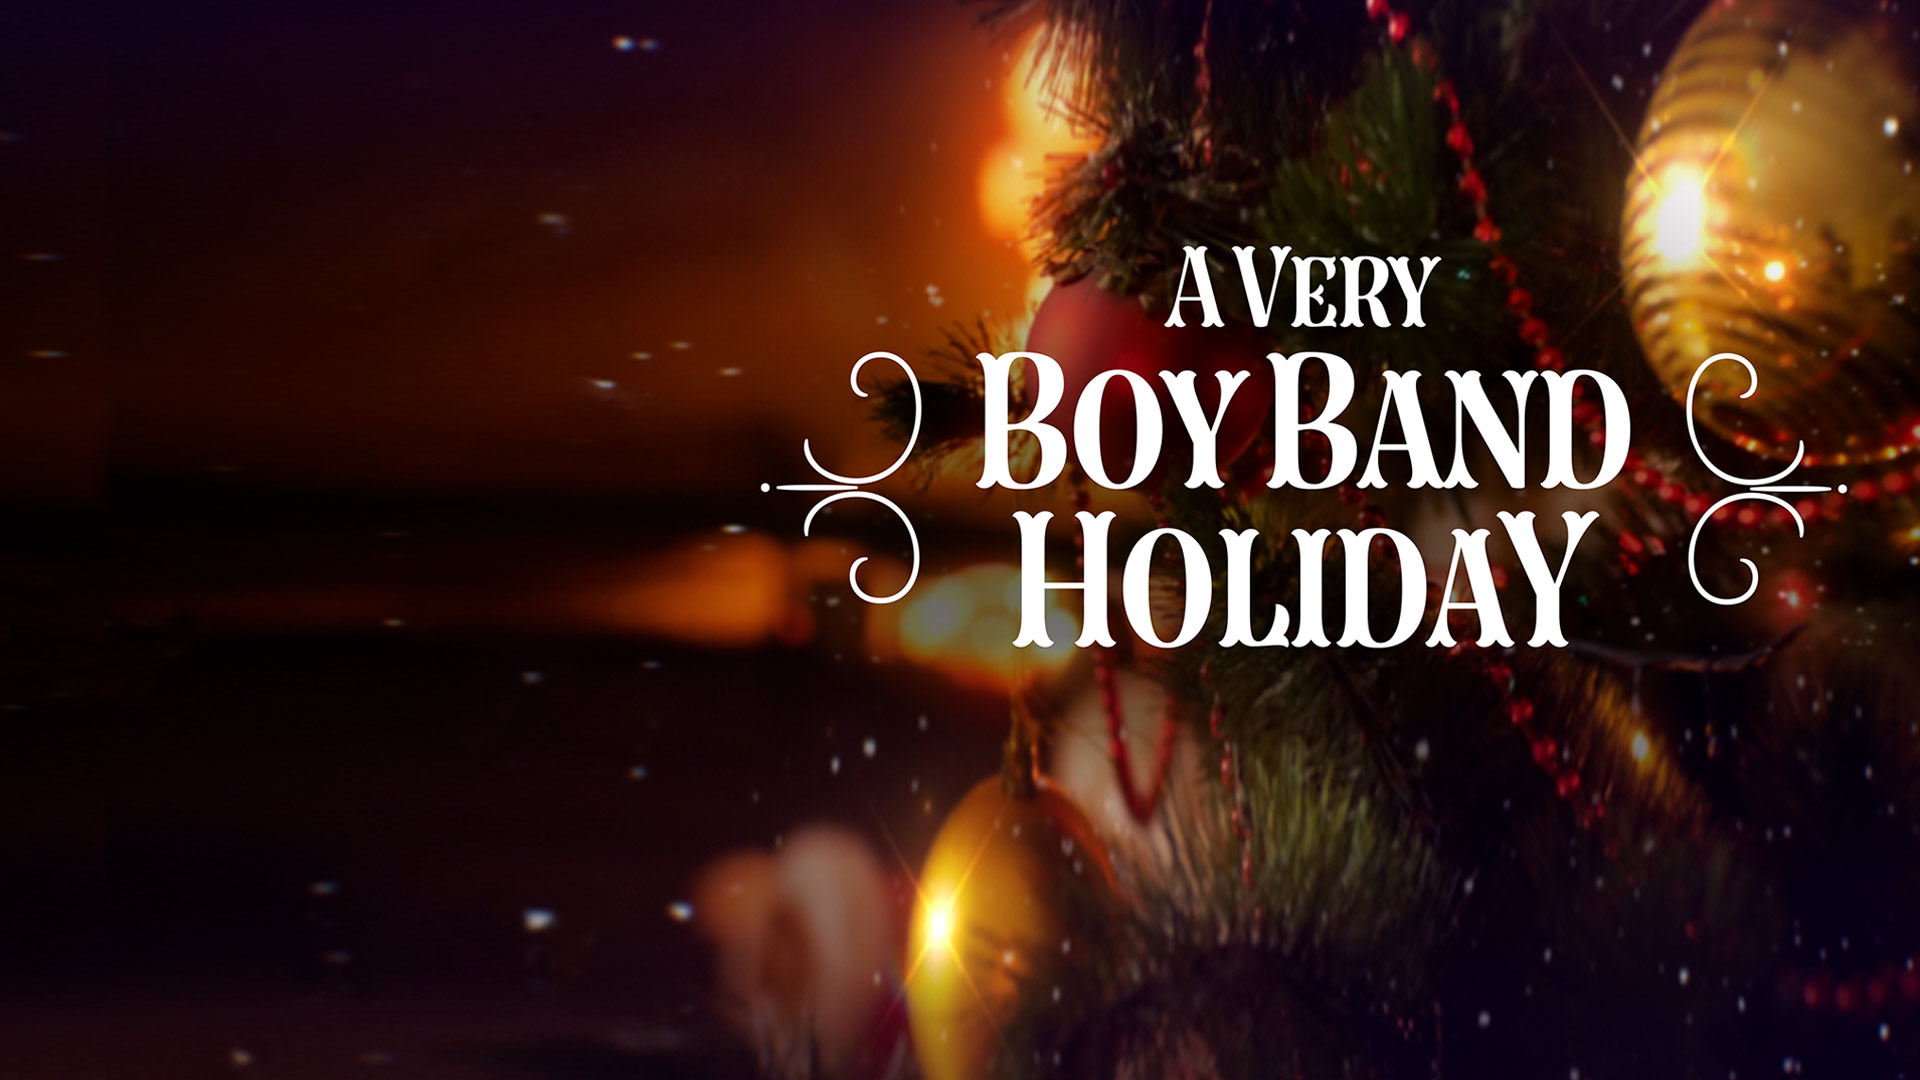 Watch Movie A Very Boy Band Holiday Only on Watcho